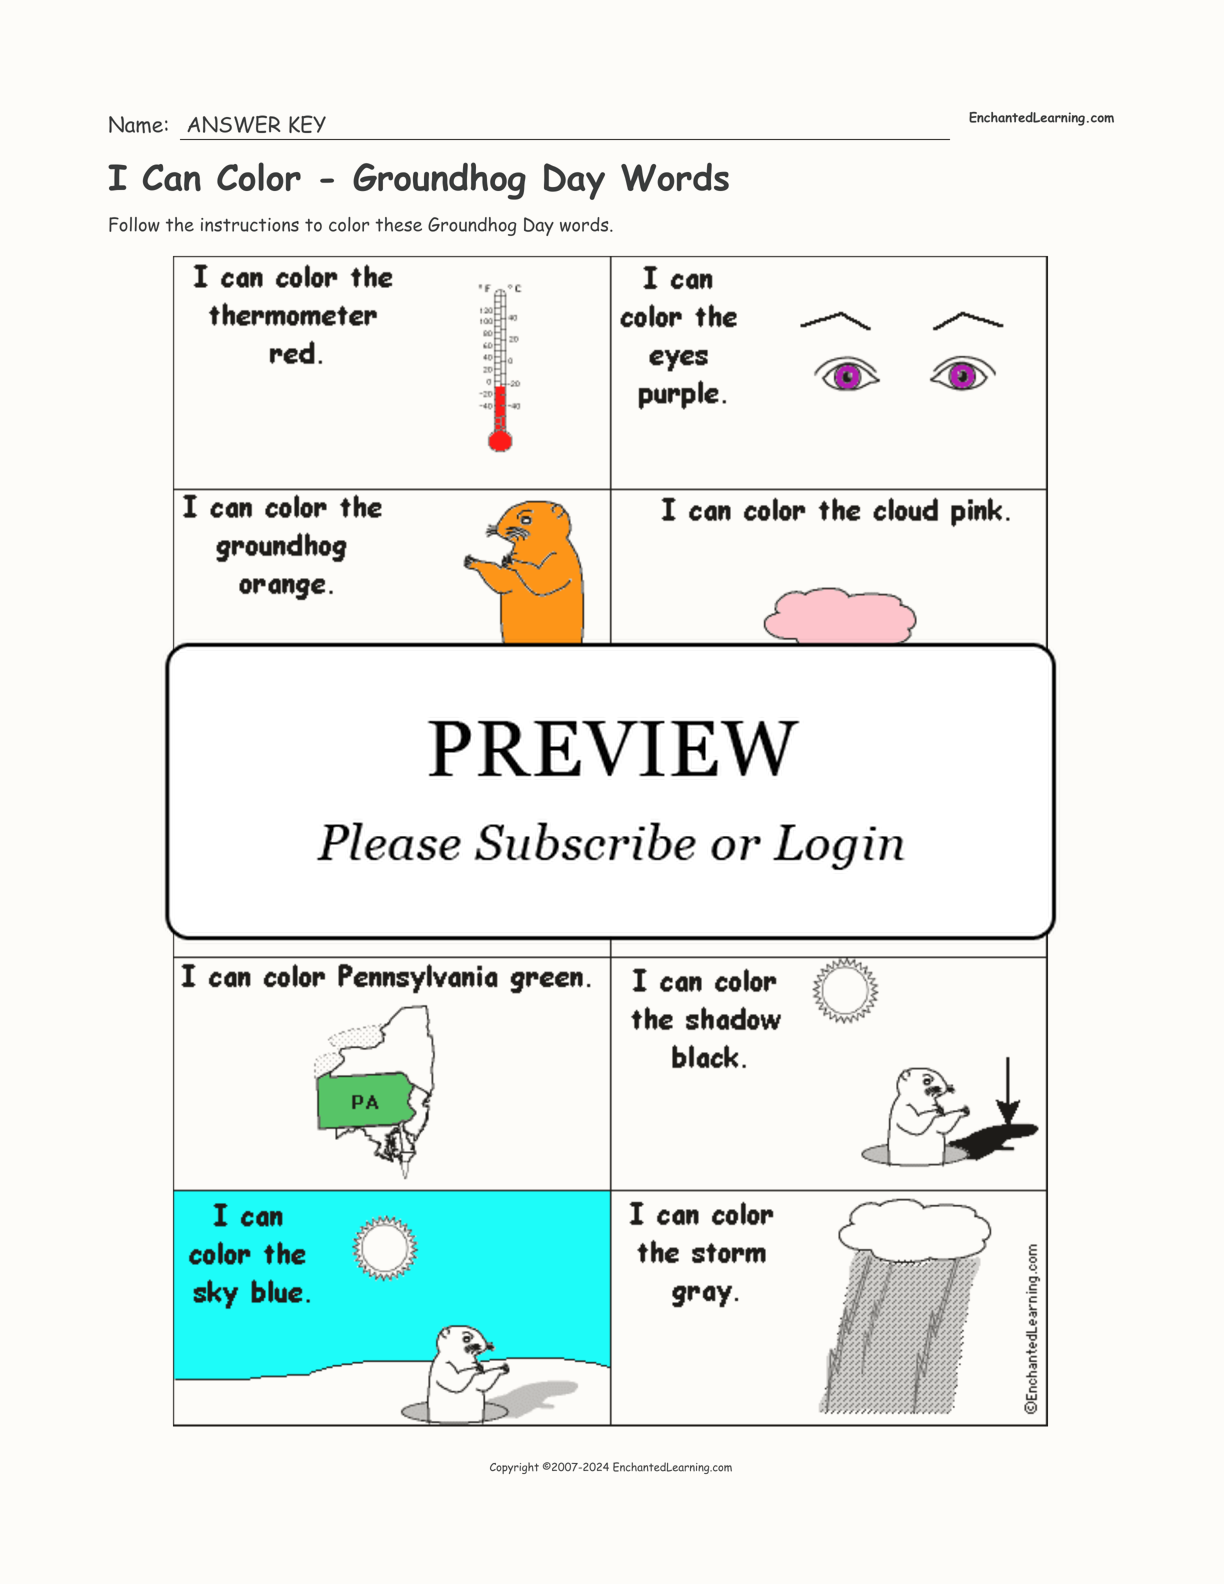 I Can Color - Groundhog Day Words interactive worksheet page 2